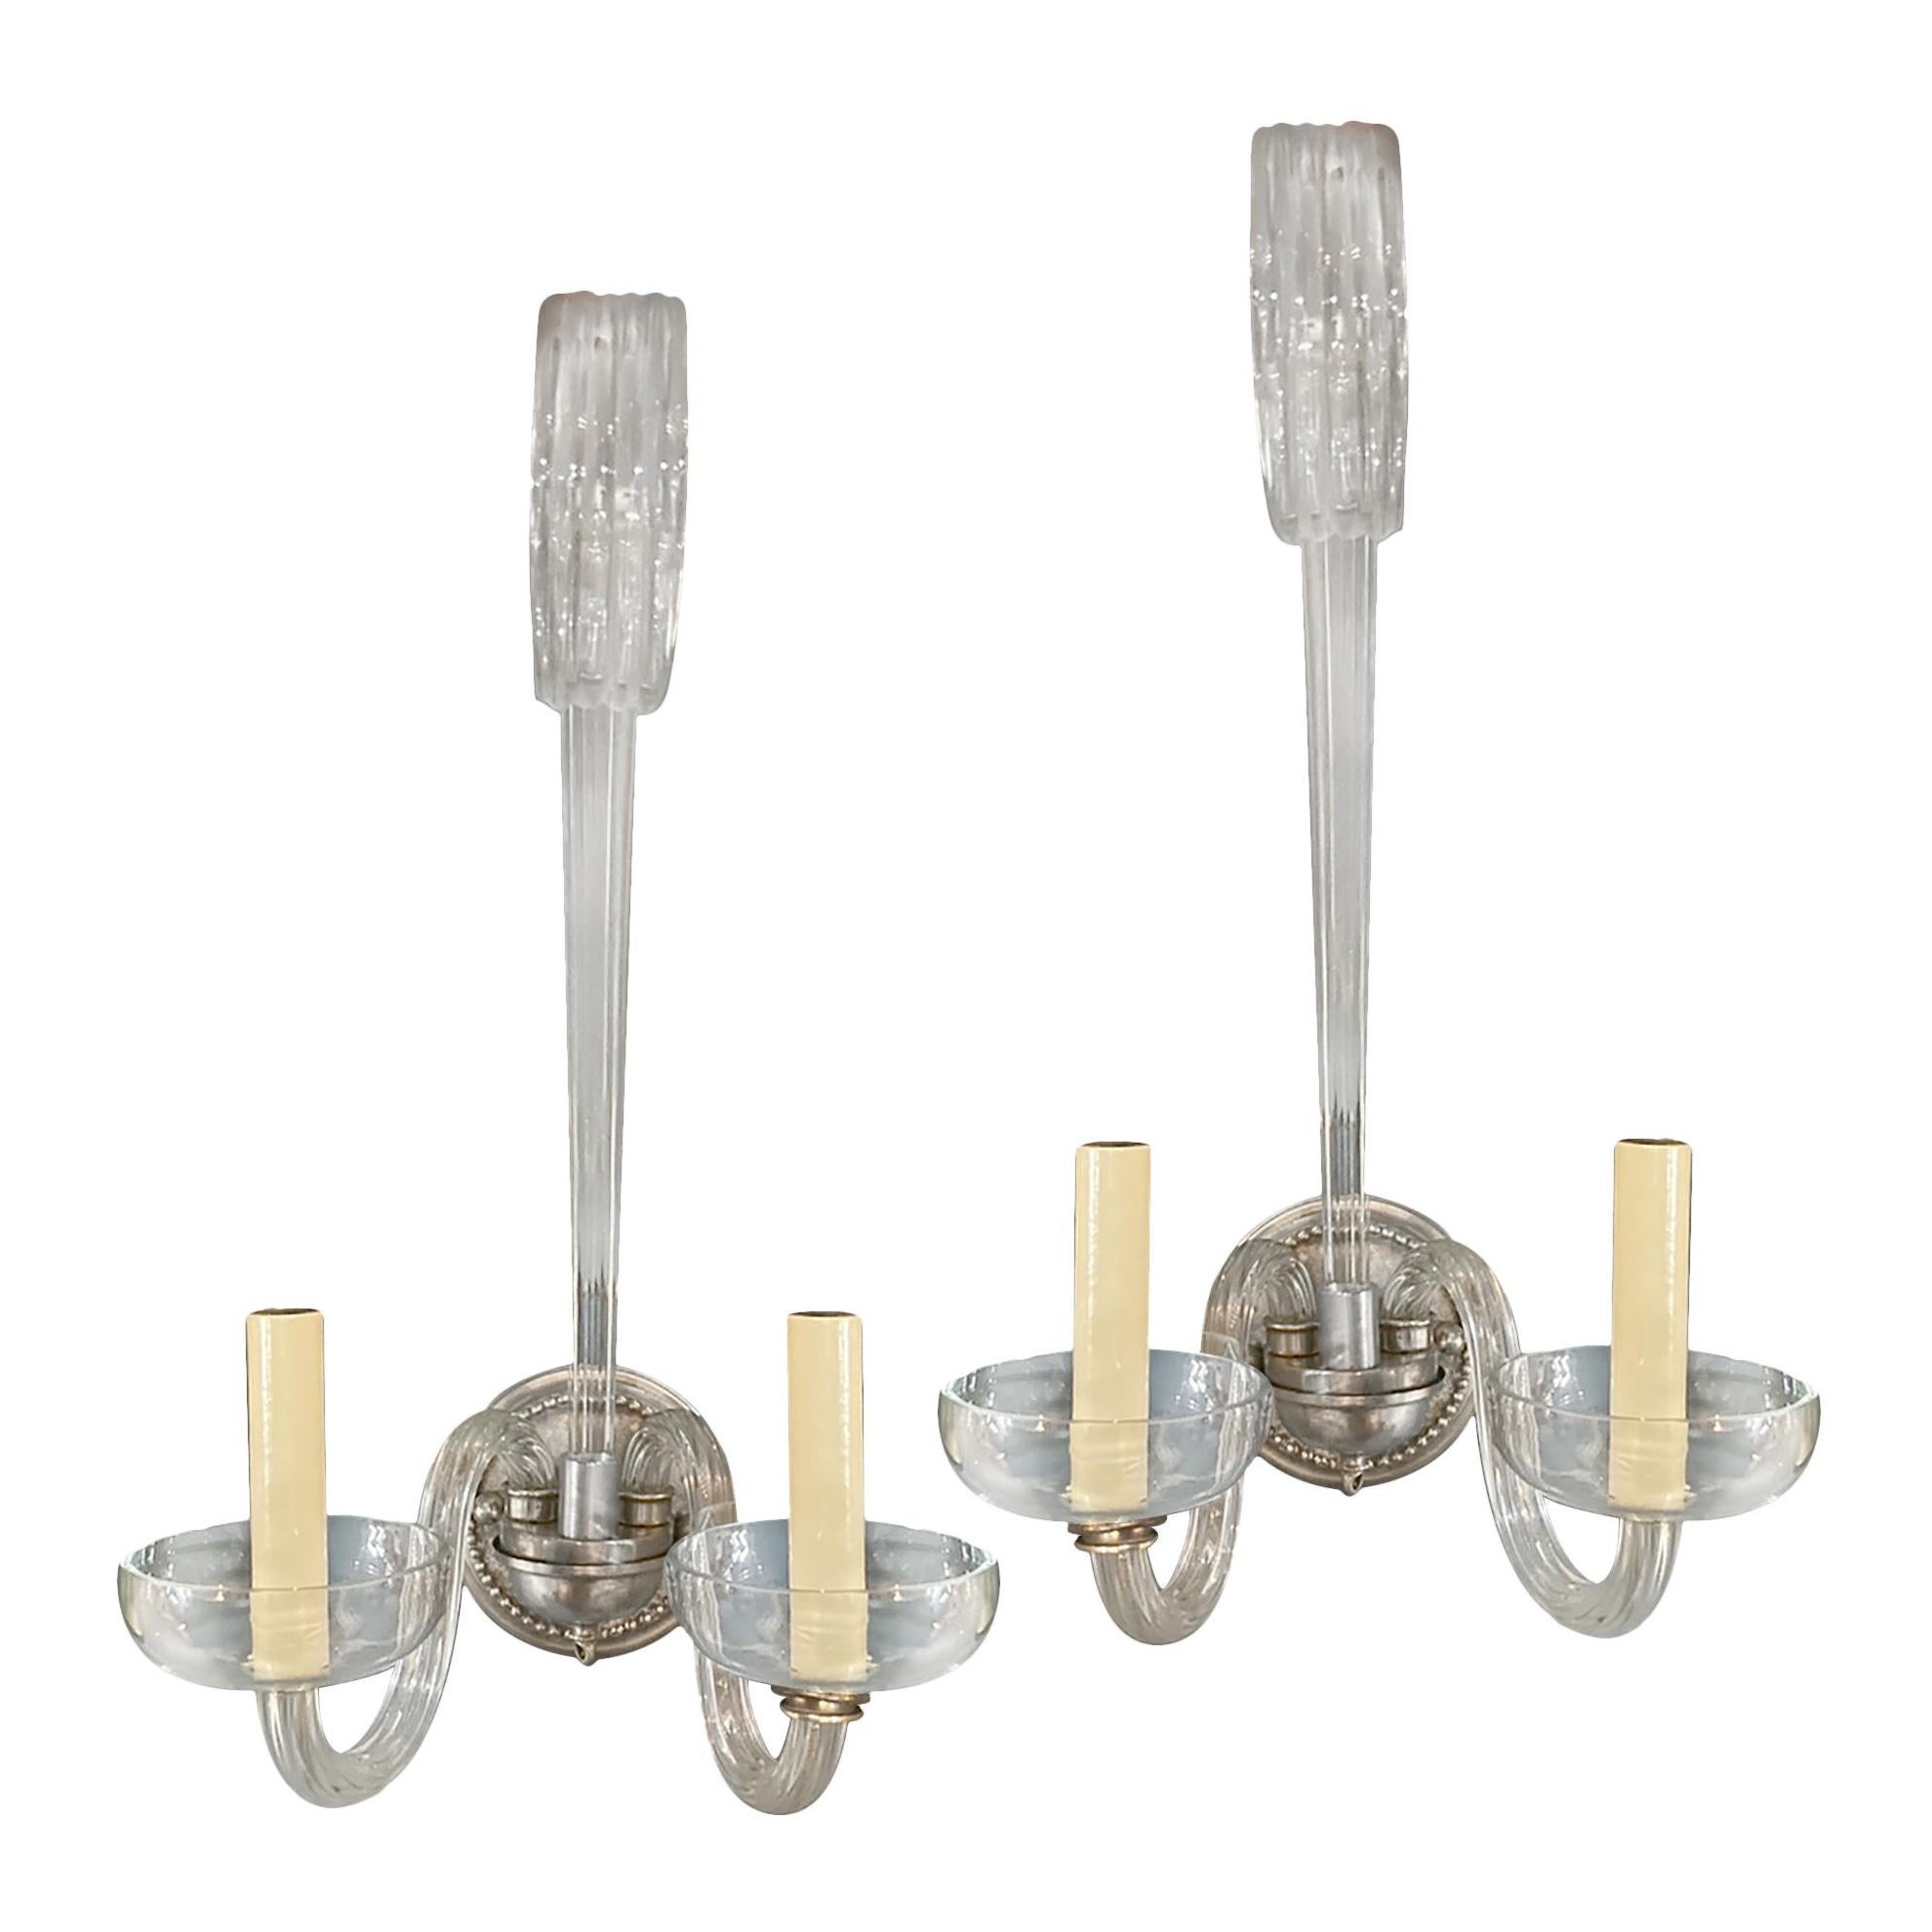 Pair of Antique Murano Glass Sconces For Sale